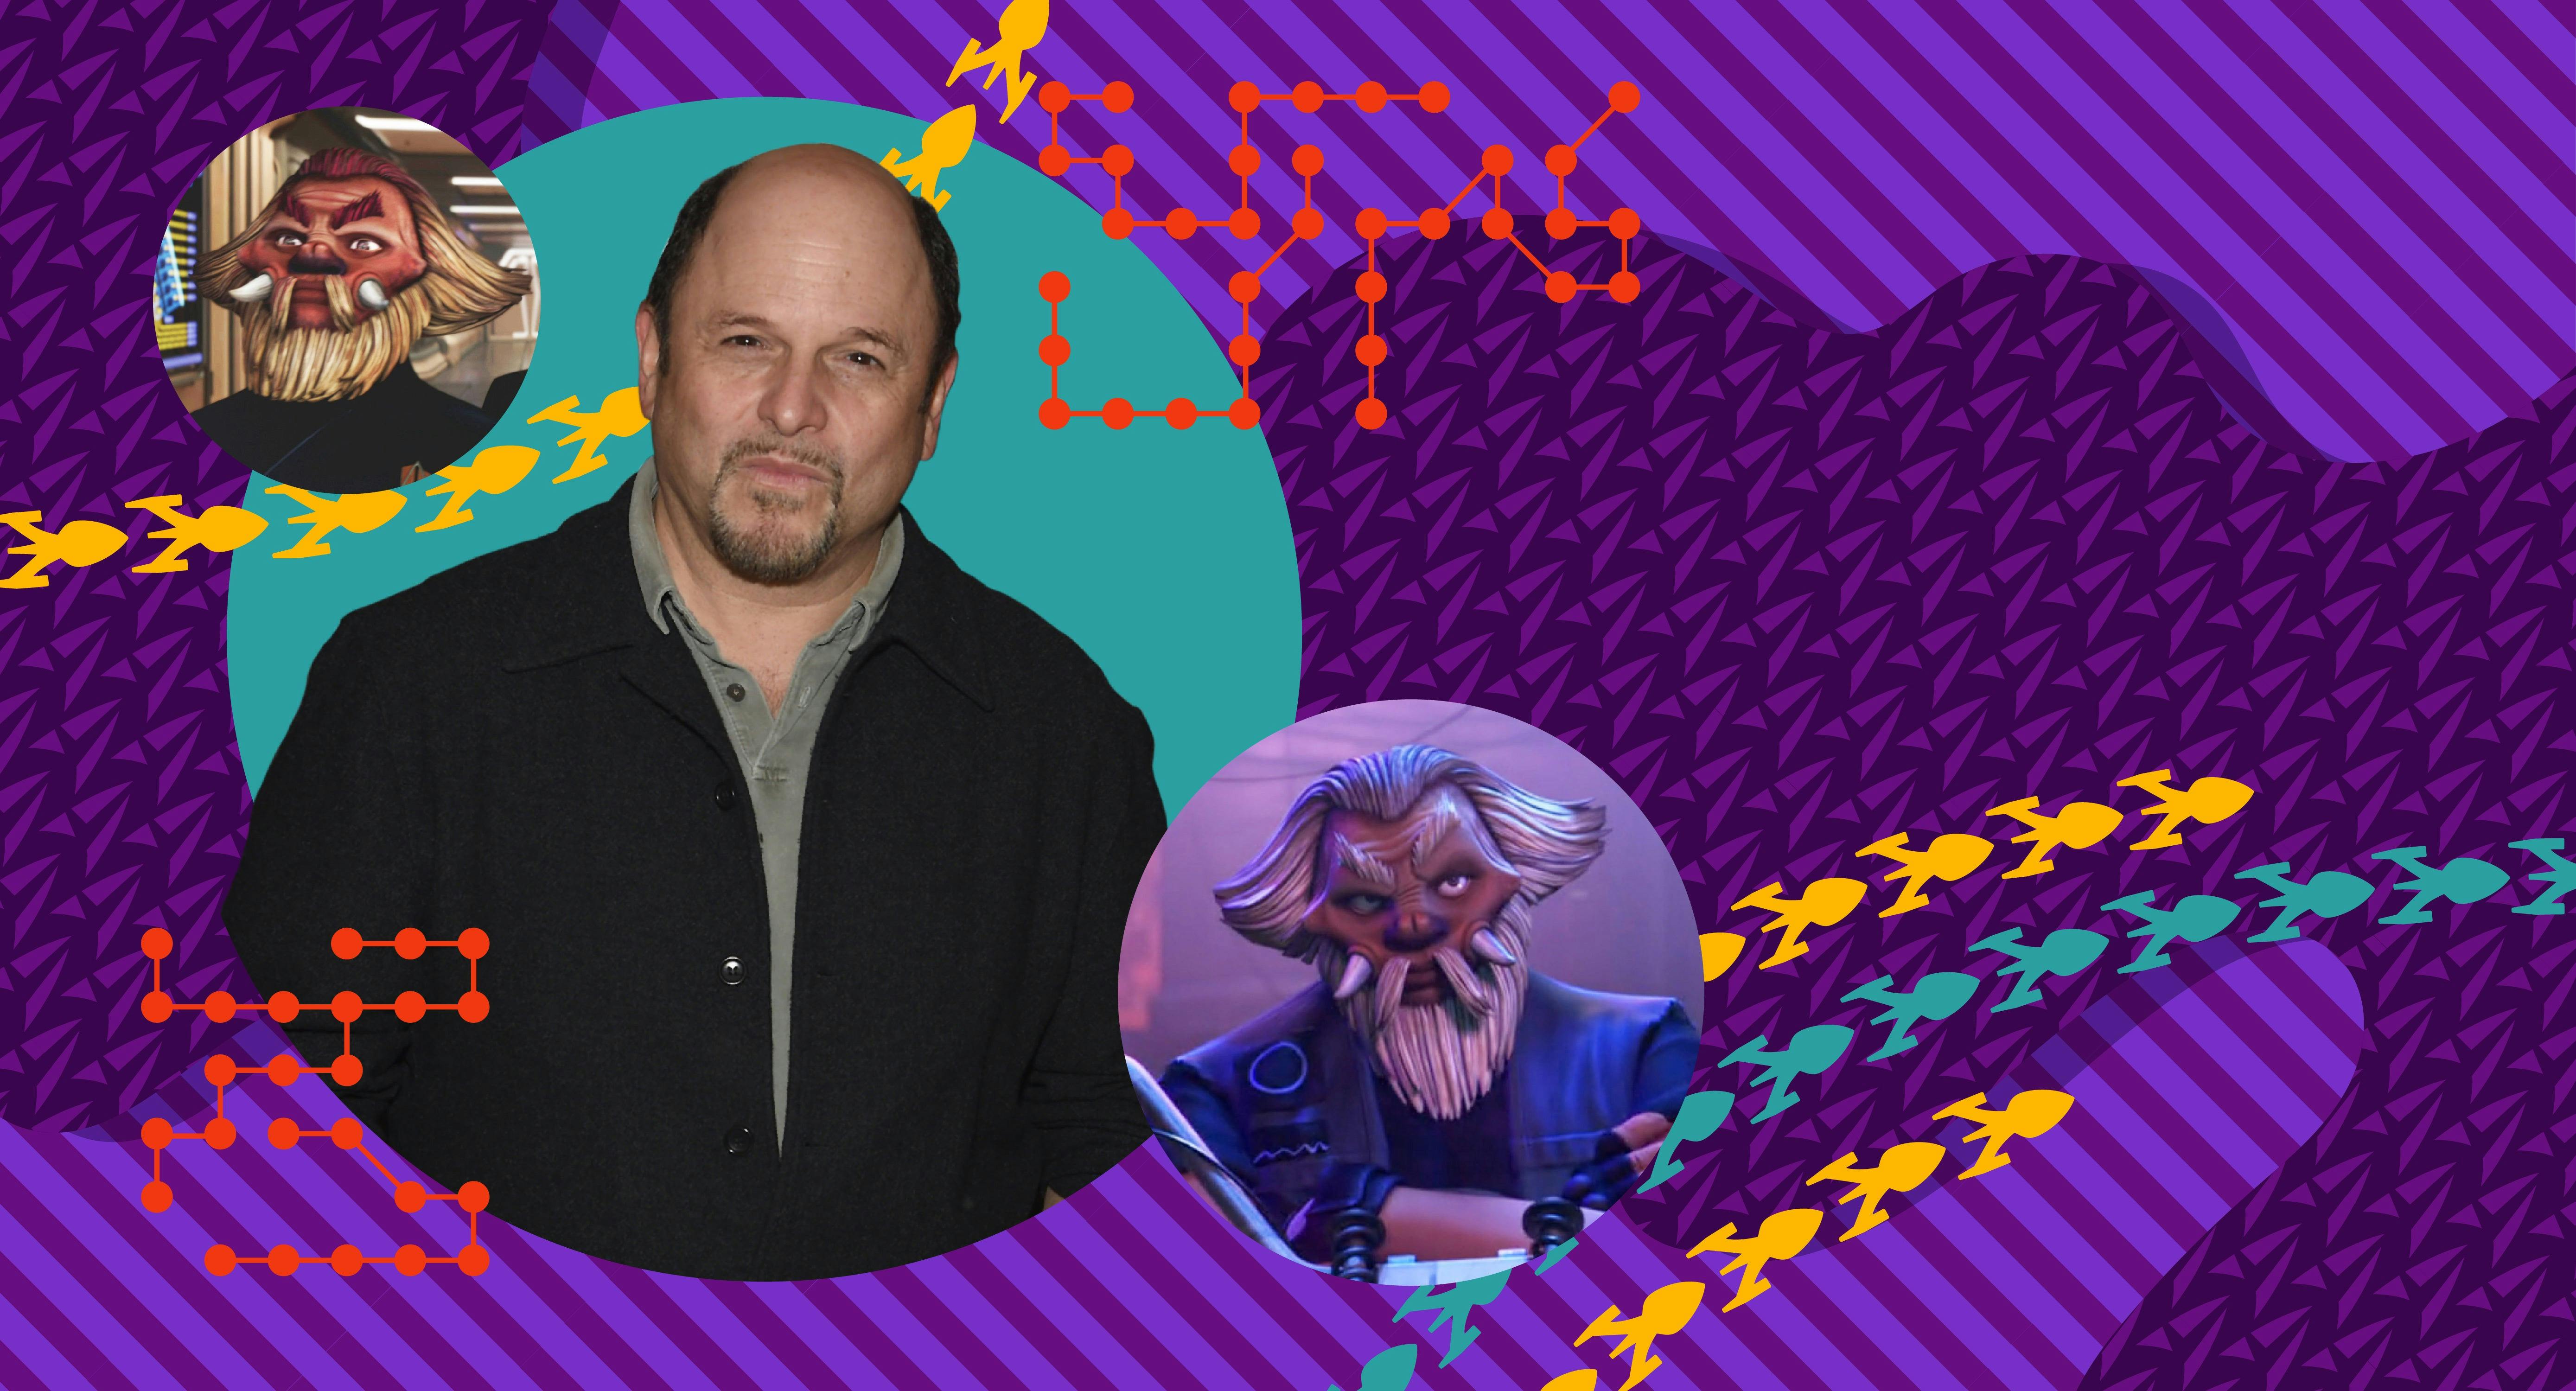 Illustrated banner of Jason Alexander and his Star Trek: Prodigy's character Dr. Noum